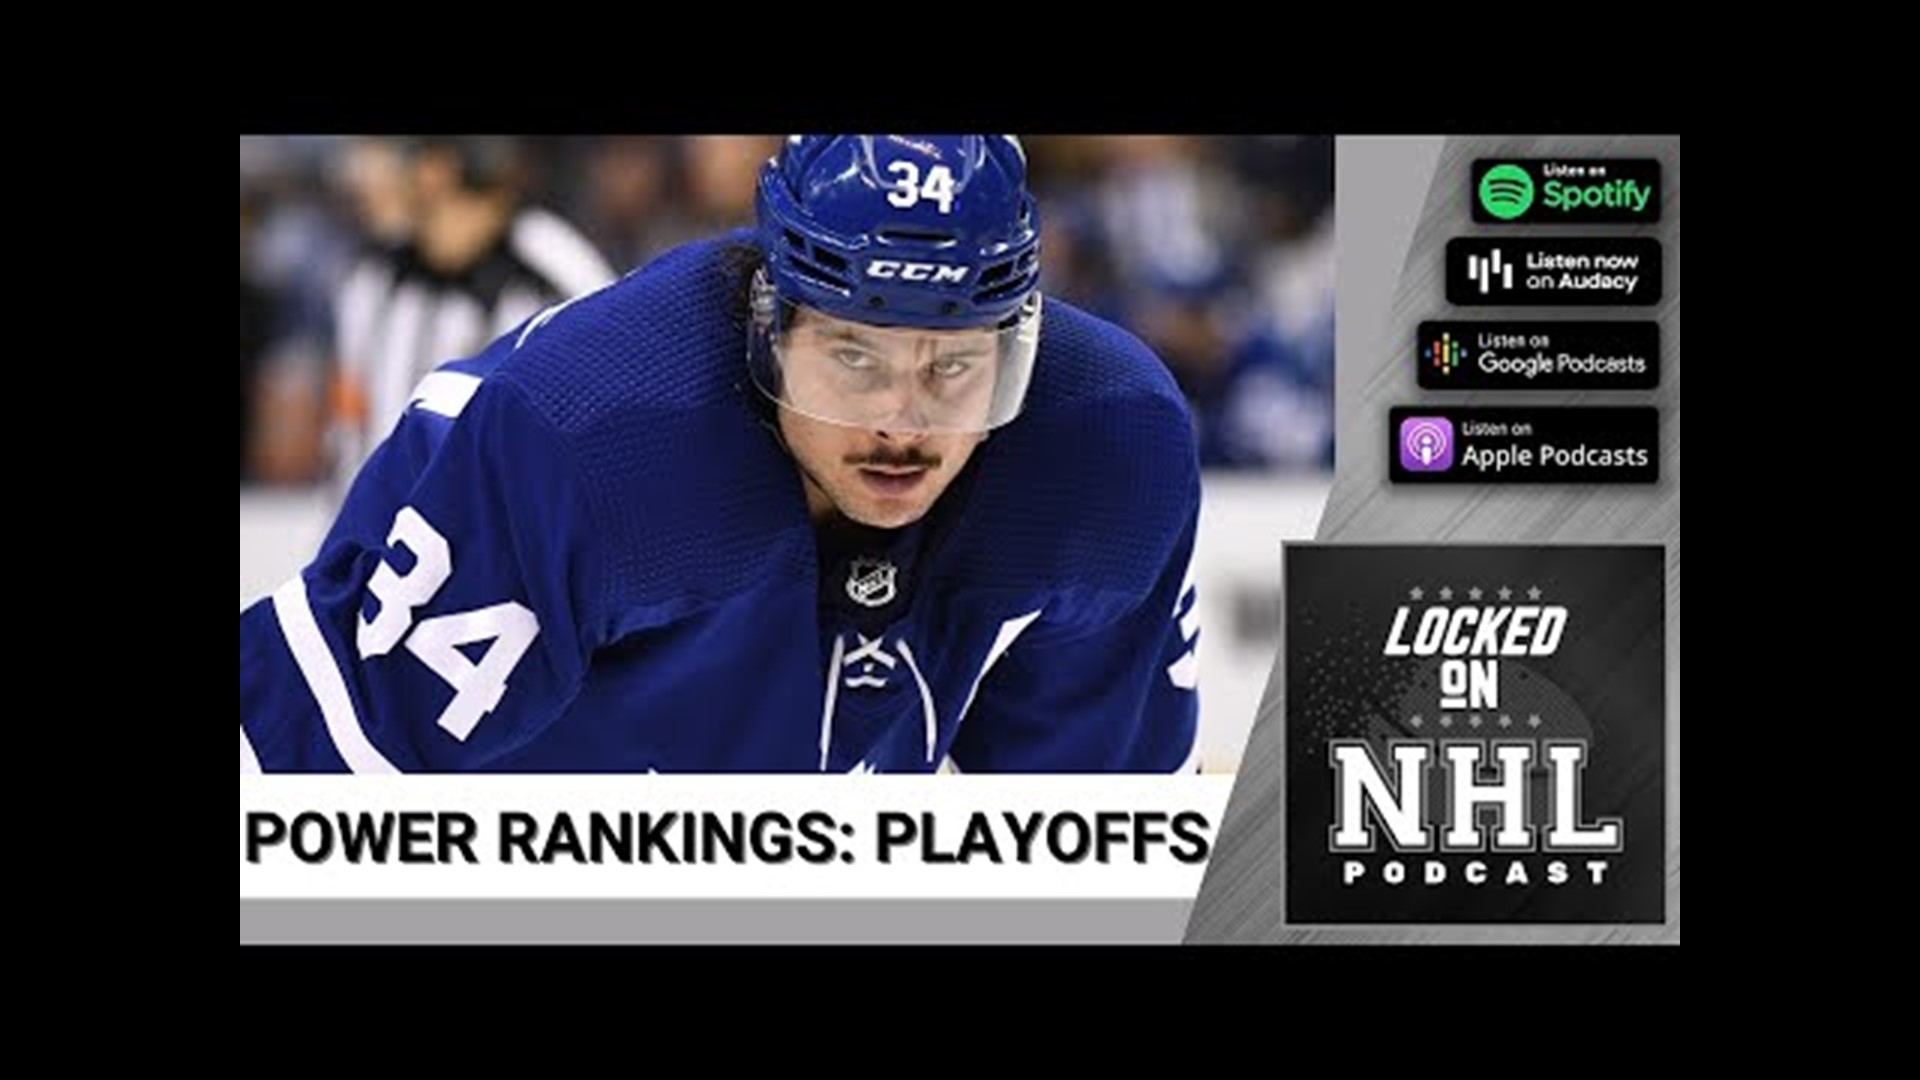 NHL Power Rankings by division, Locked On NHL